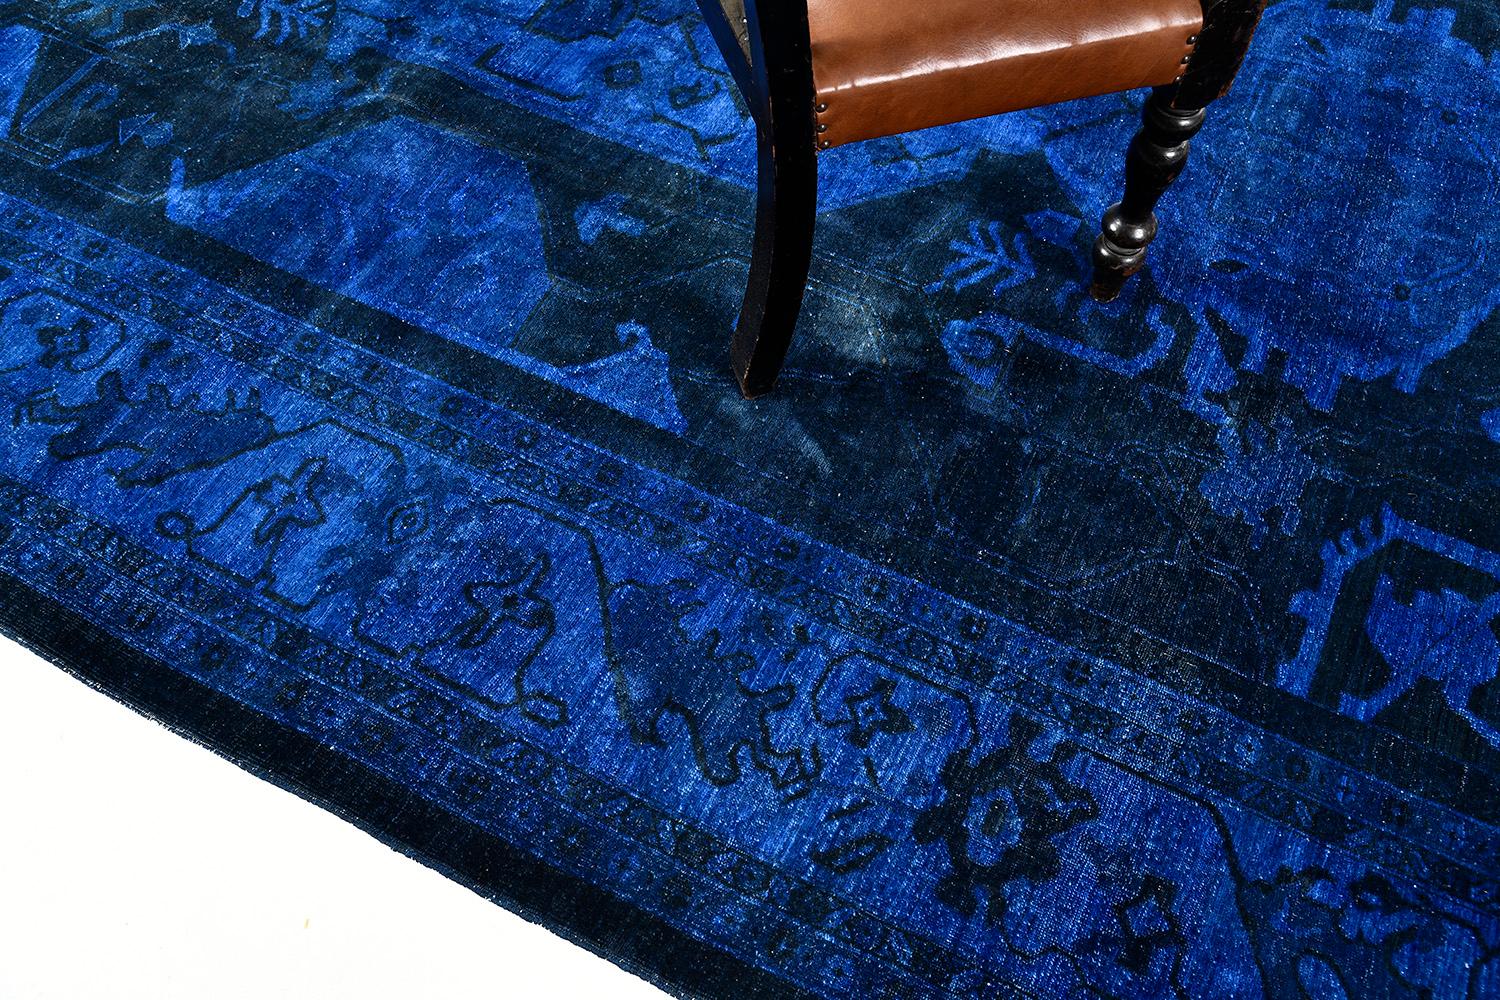 This blue overdyed raptured rug is an instant masterpiece. With its understated design and style, this woven piece of art exudes elegance from every thread. The wool is soft and supple, but durable to last a lifetime. A decor that would be loved by